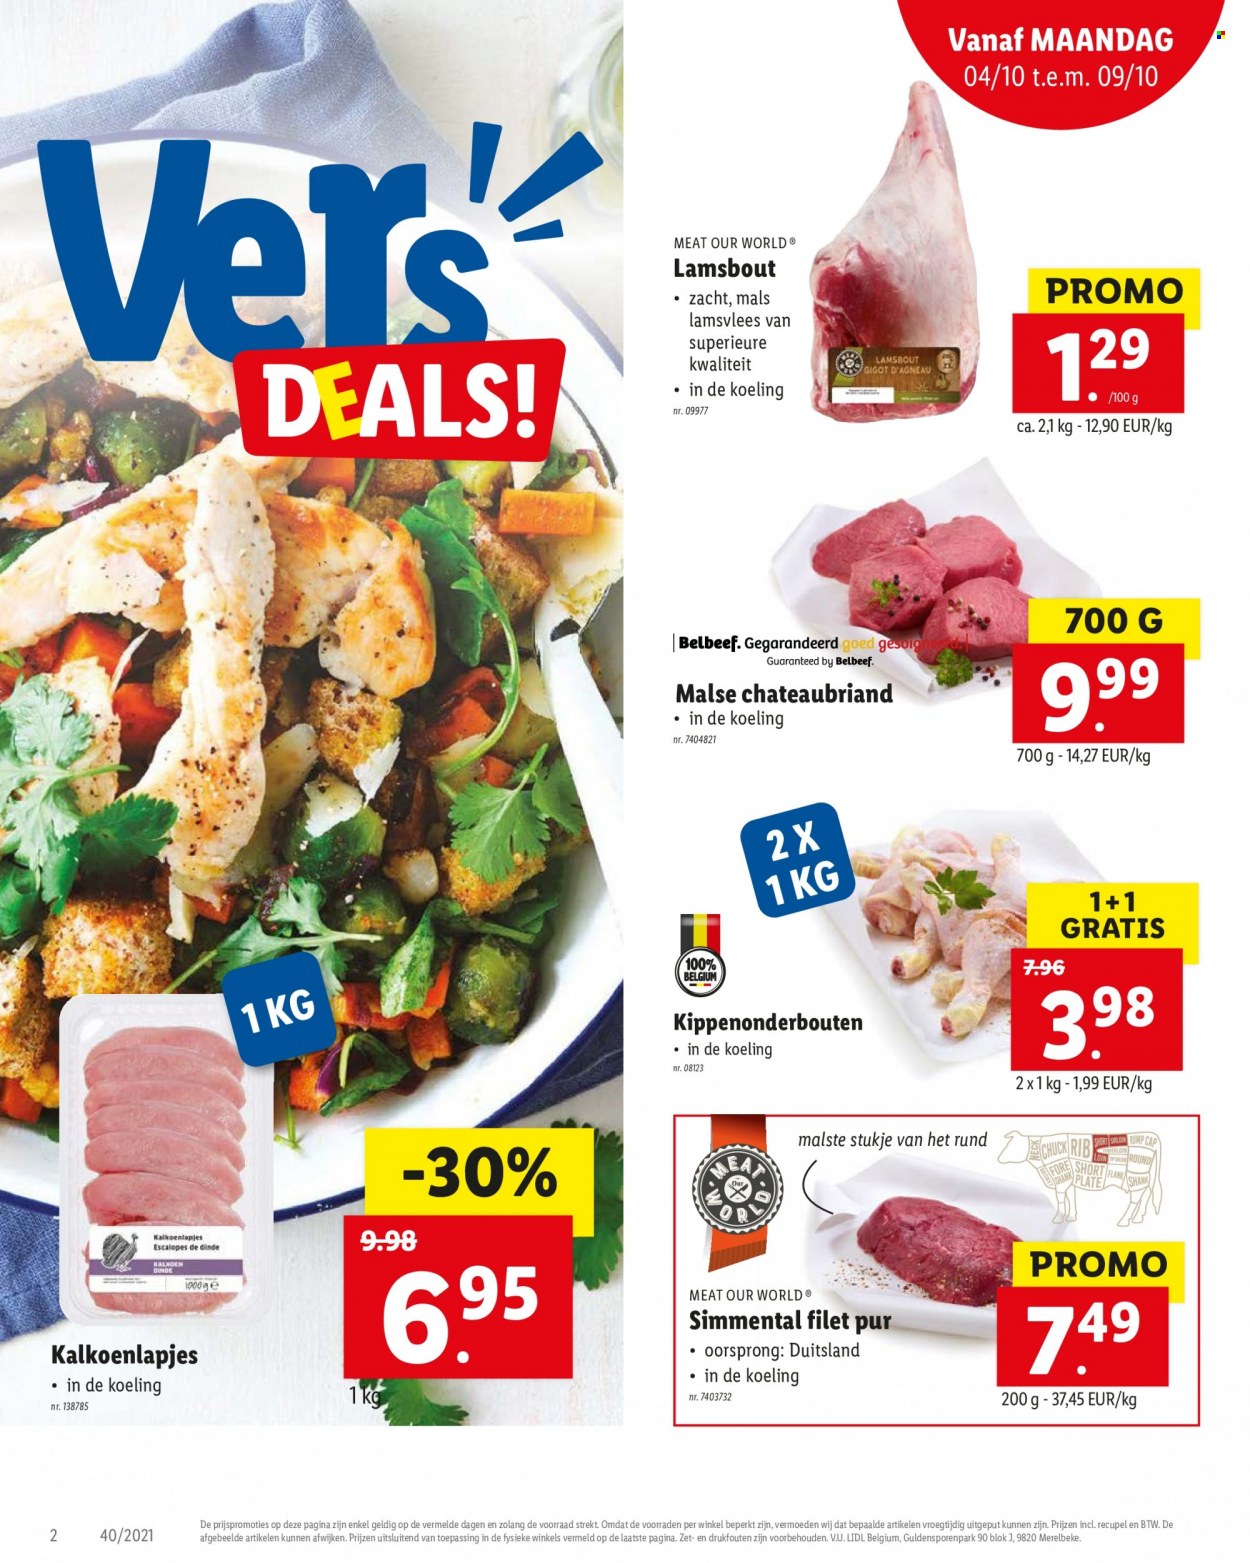 Catalogue Lidl - 4.10.2021 - 9.10.2021. Page 2.